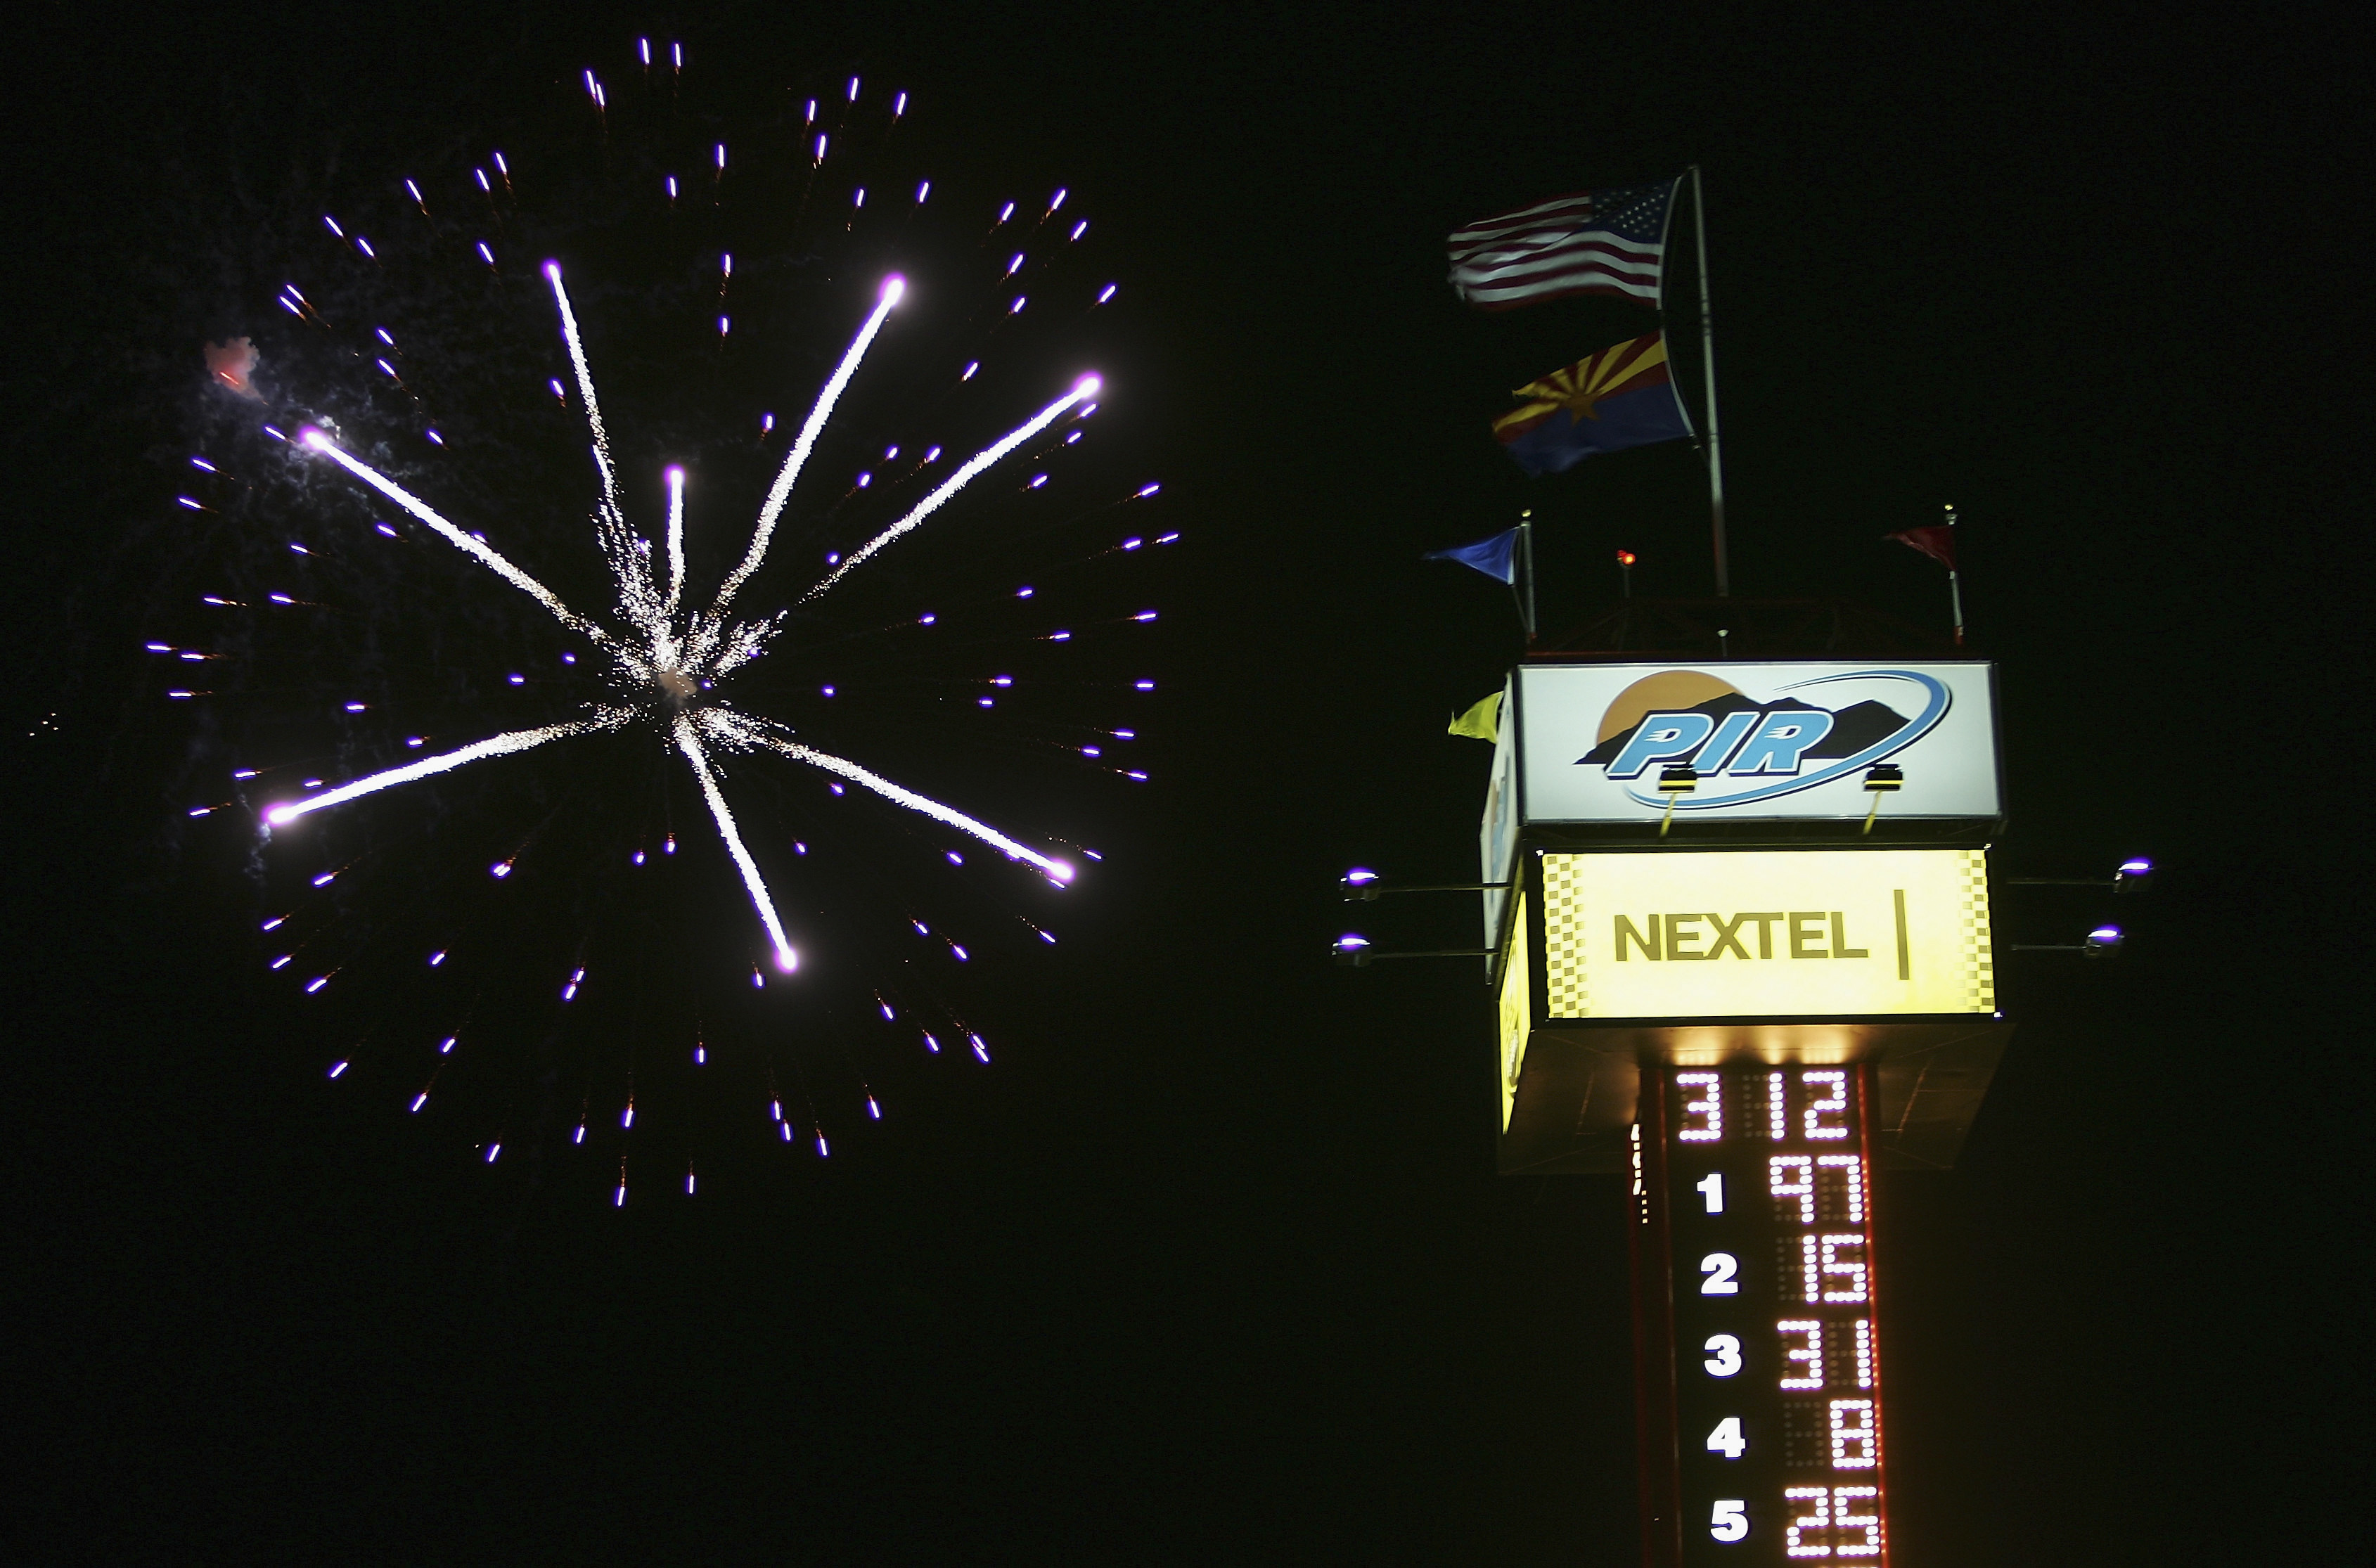 PHOENIX,  AZ - APRIL 23: Fireworks light up the sky as the scoring tower shows the race results after Kurt Busch driver of the #97 Roush Racing Irwin Industrial Tools Ford won the NASCAR Nextel Cup Series Subway Fresh 500 at the Phoenix International Race